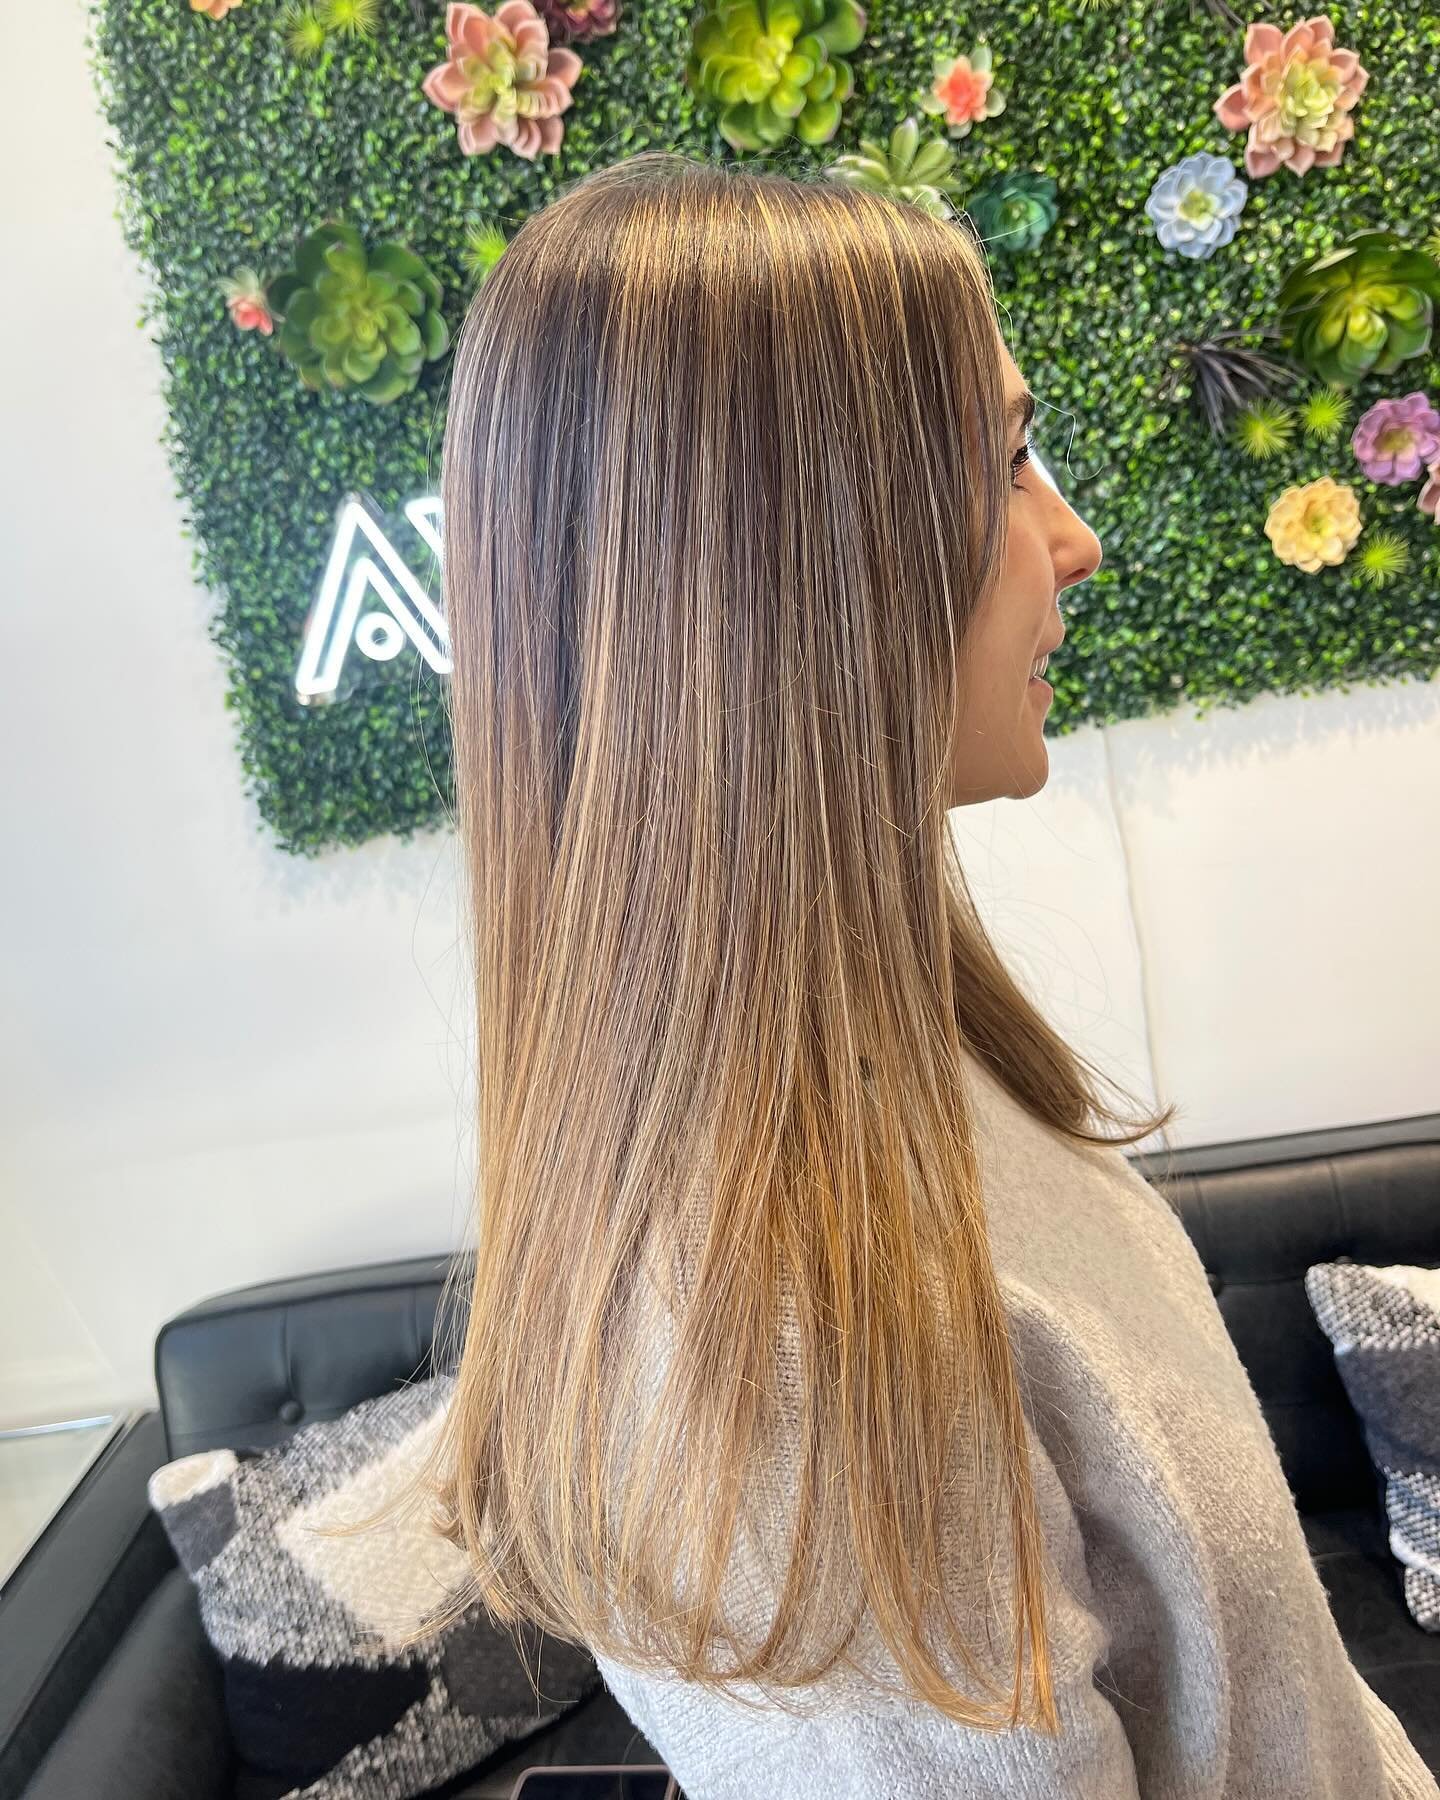 Beautiful carmel highlights done by @beauty.bynicolette. This sun-kissed look blends seamlessly with the brunette base, creating a soft and subtle contrast. Book your next color appointment to freshen up your look!